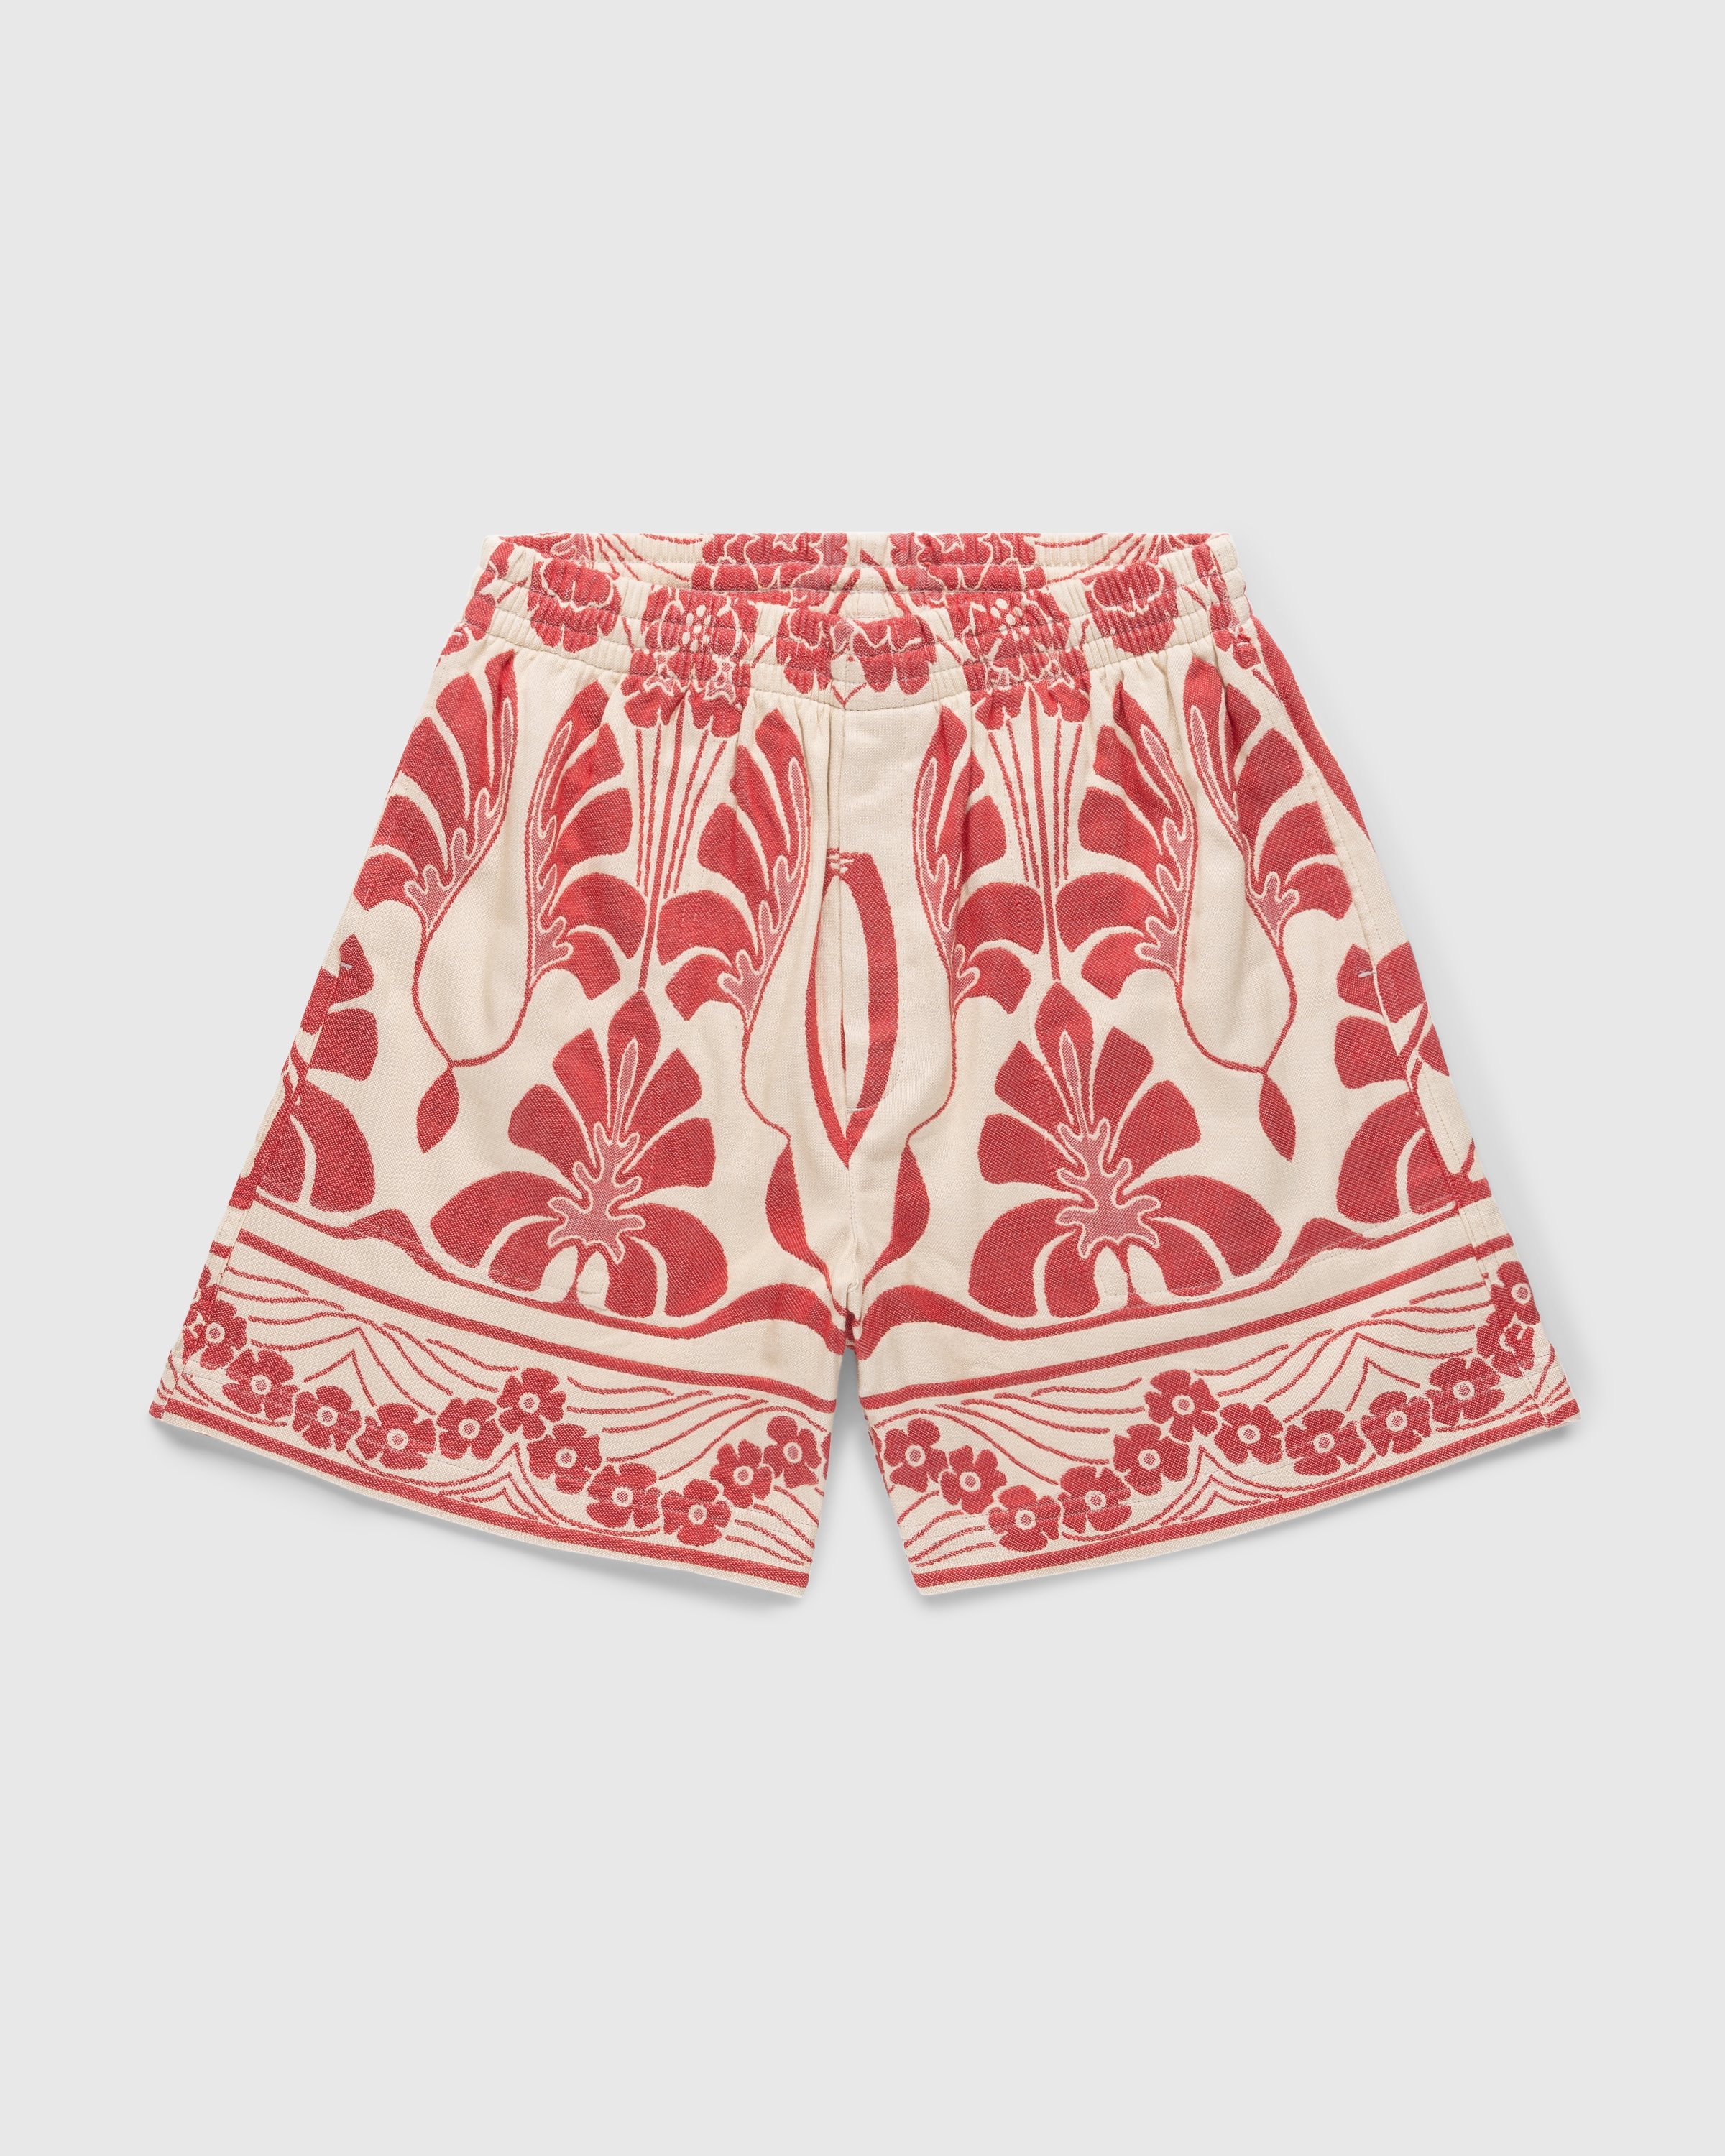 Bode - Nouveau Monstera Shorts - Clothing - Red - Image 1